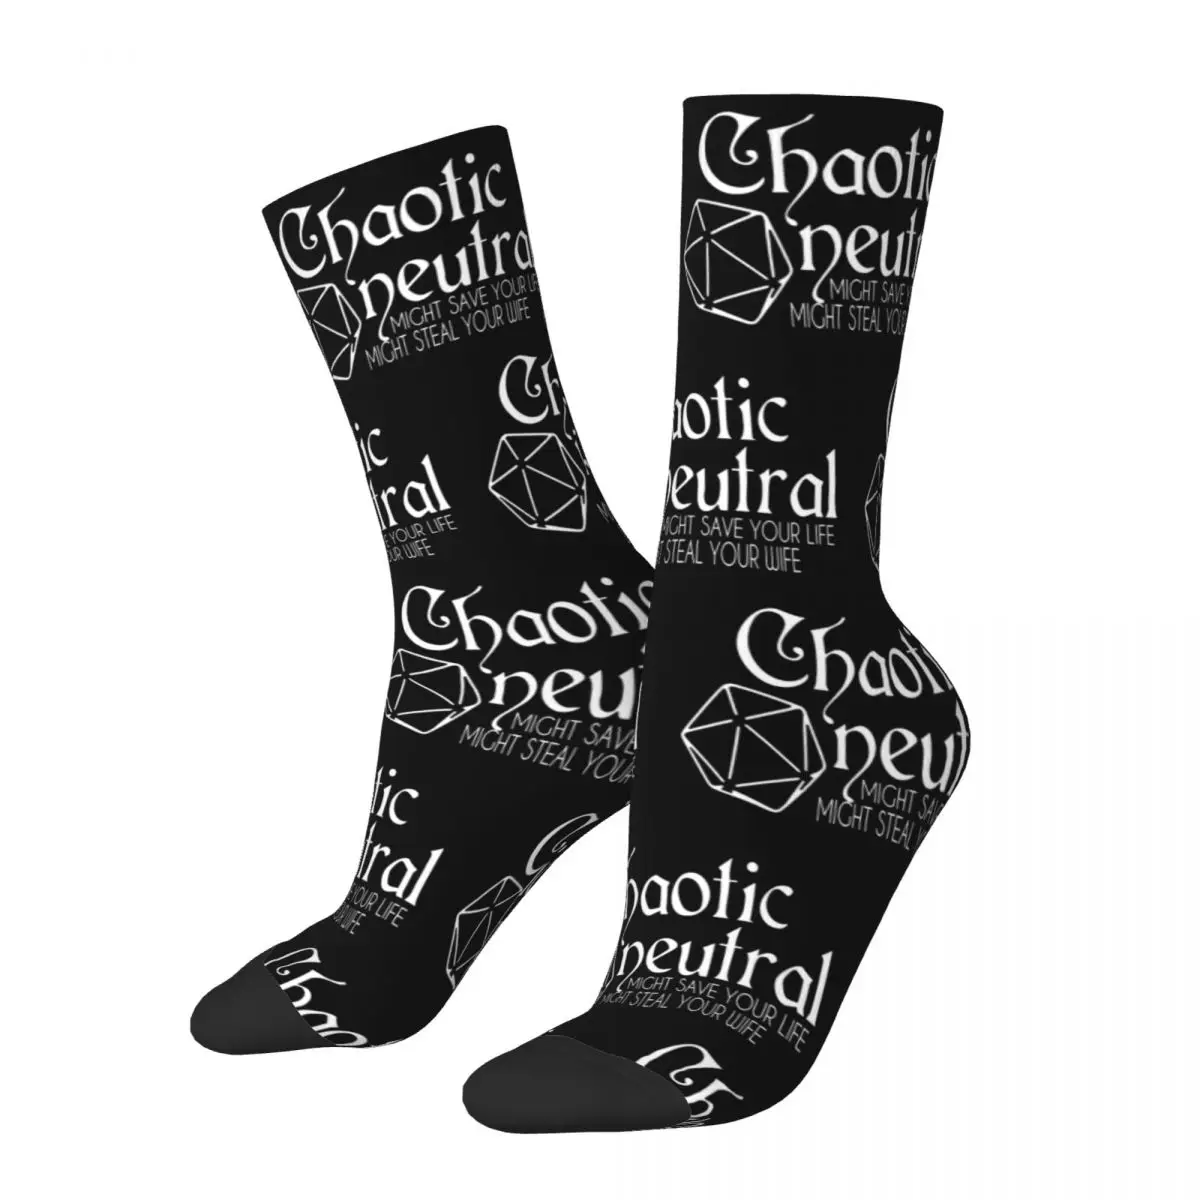 

Crew Socks Chaotic Neutral, Might Save Your Life, Might Steal Your Wife Merch for Male Sweat Absorbing Crew Socks All Seasons